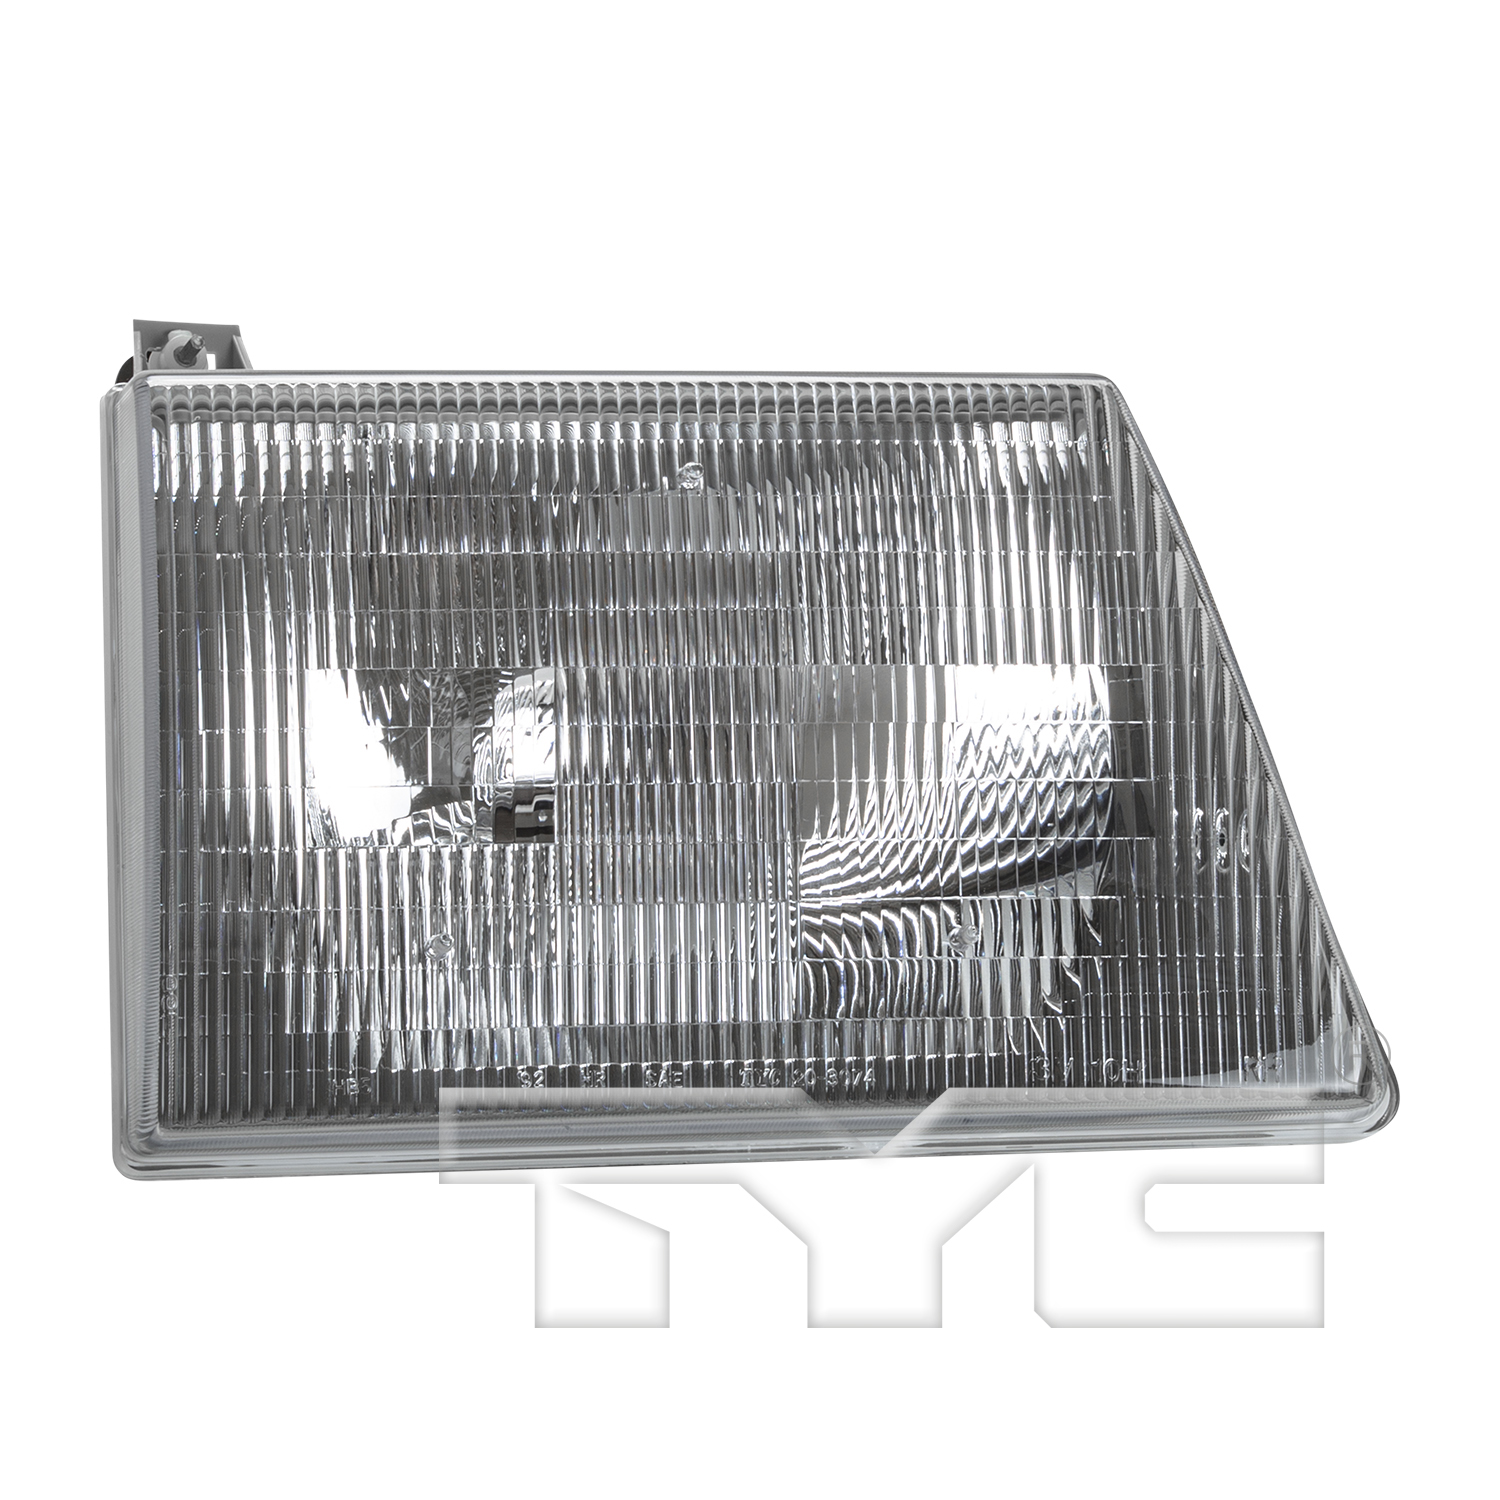 Aftermarket HEADLIGHTS for FORD - E-250, E-250,03-07,RT Headlamp assy composite